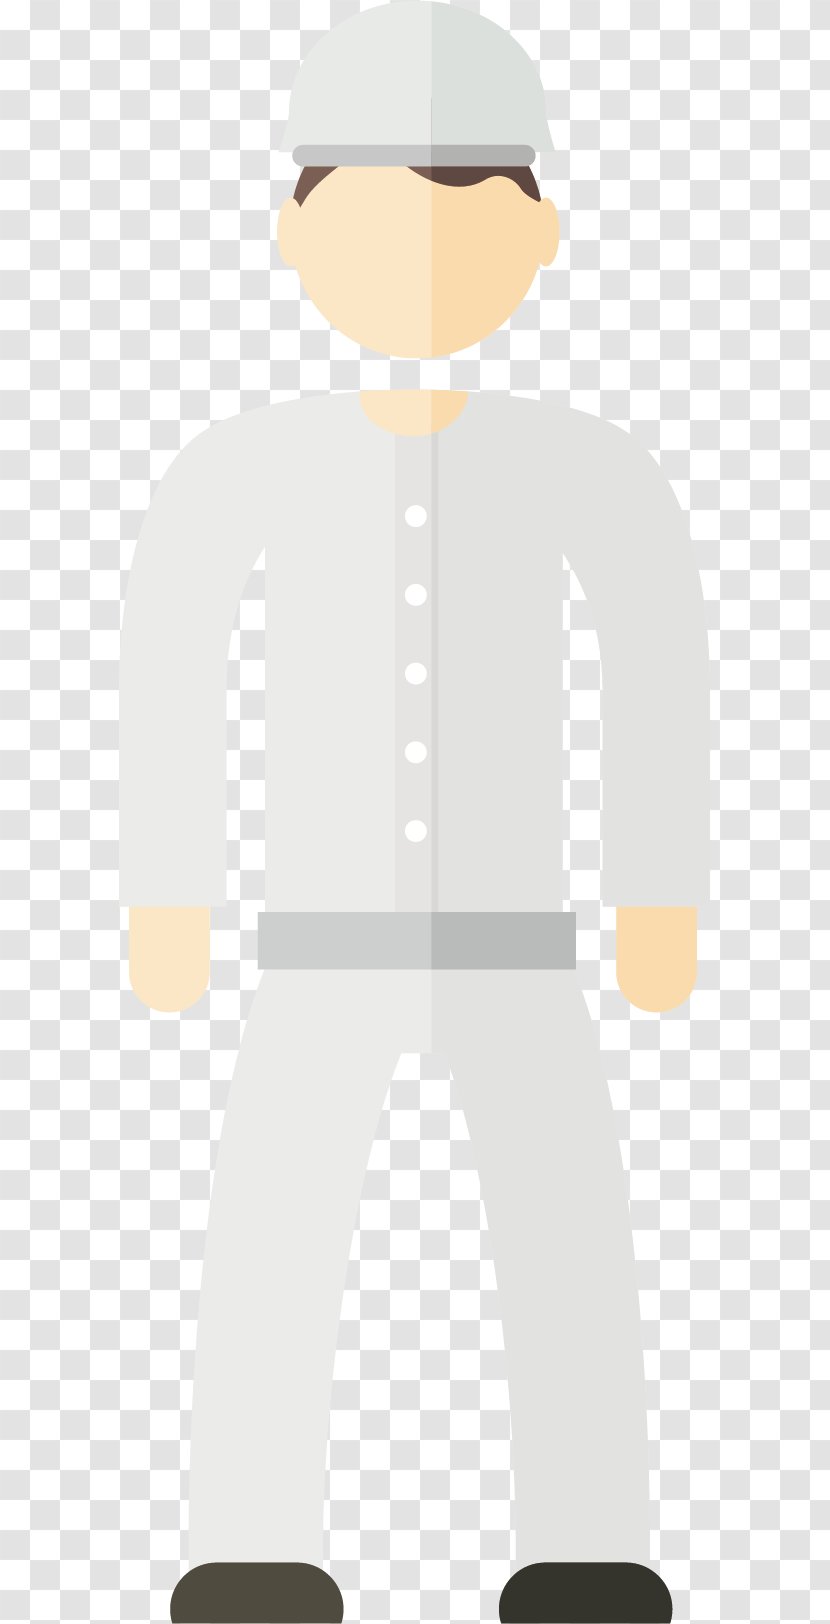 Laborer Illustration - Field Workers Grey Clothes Transparent PNG